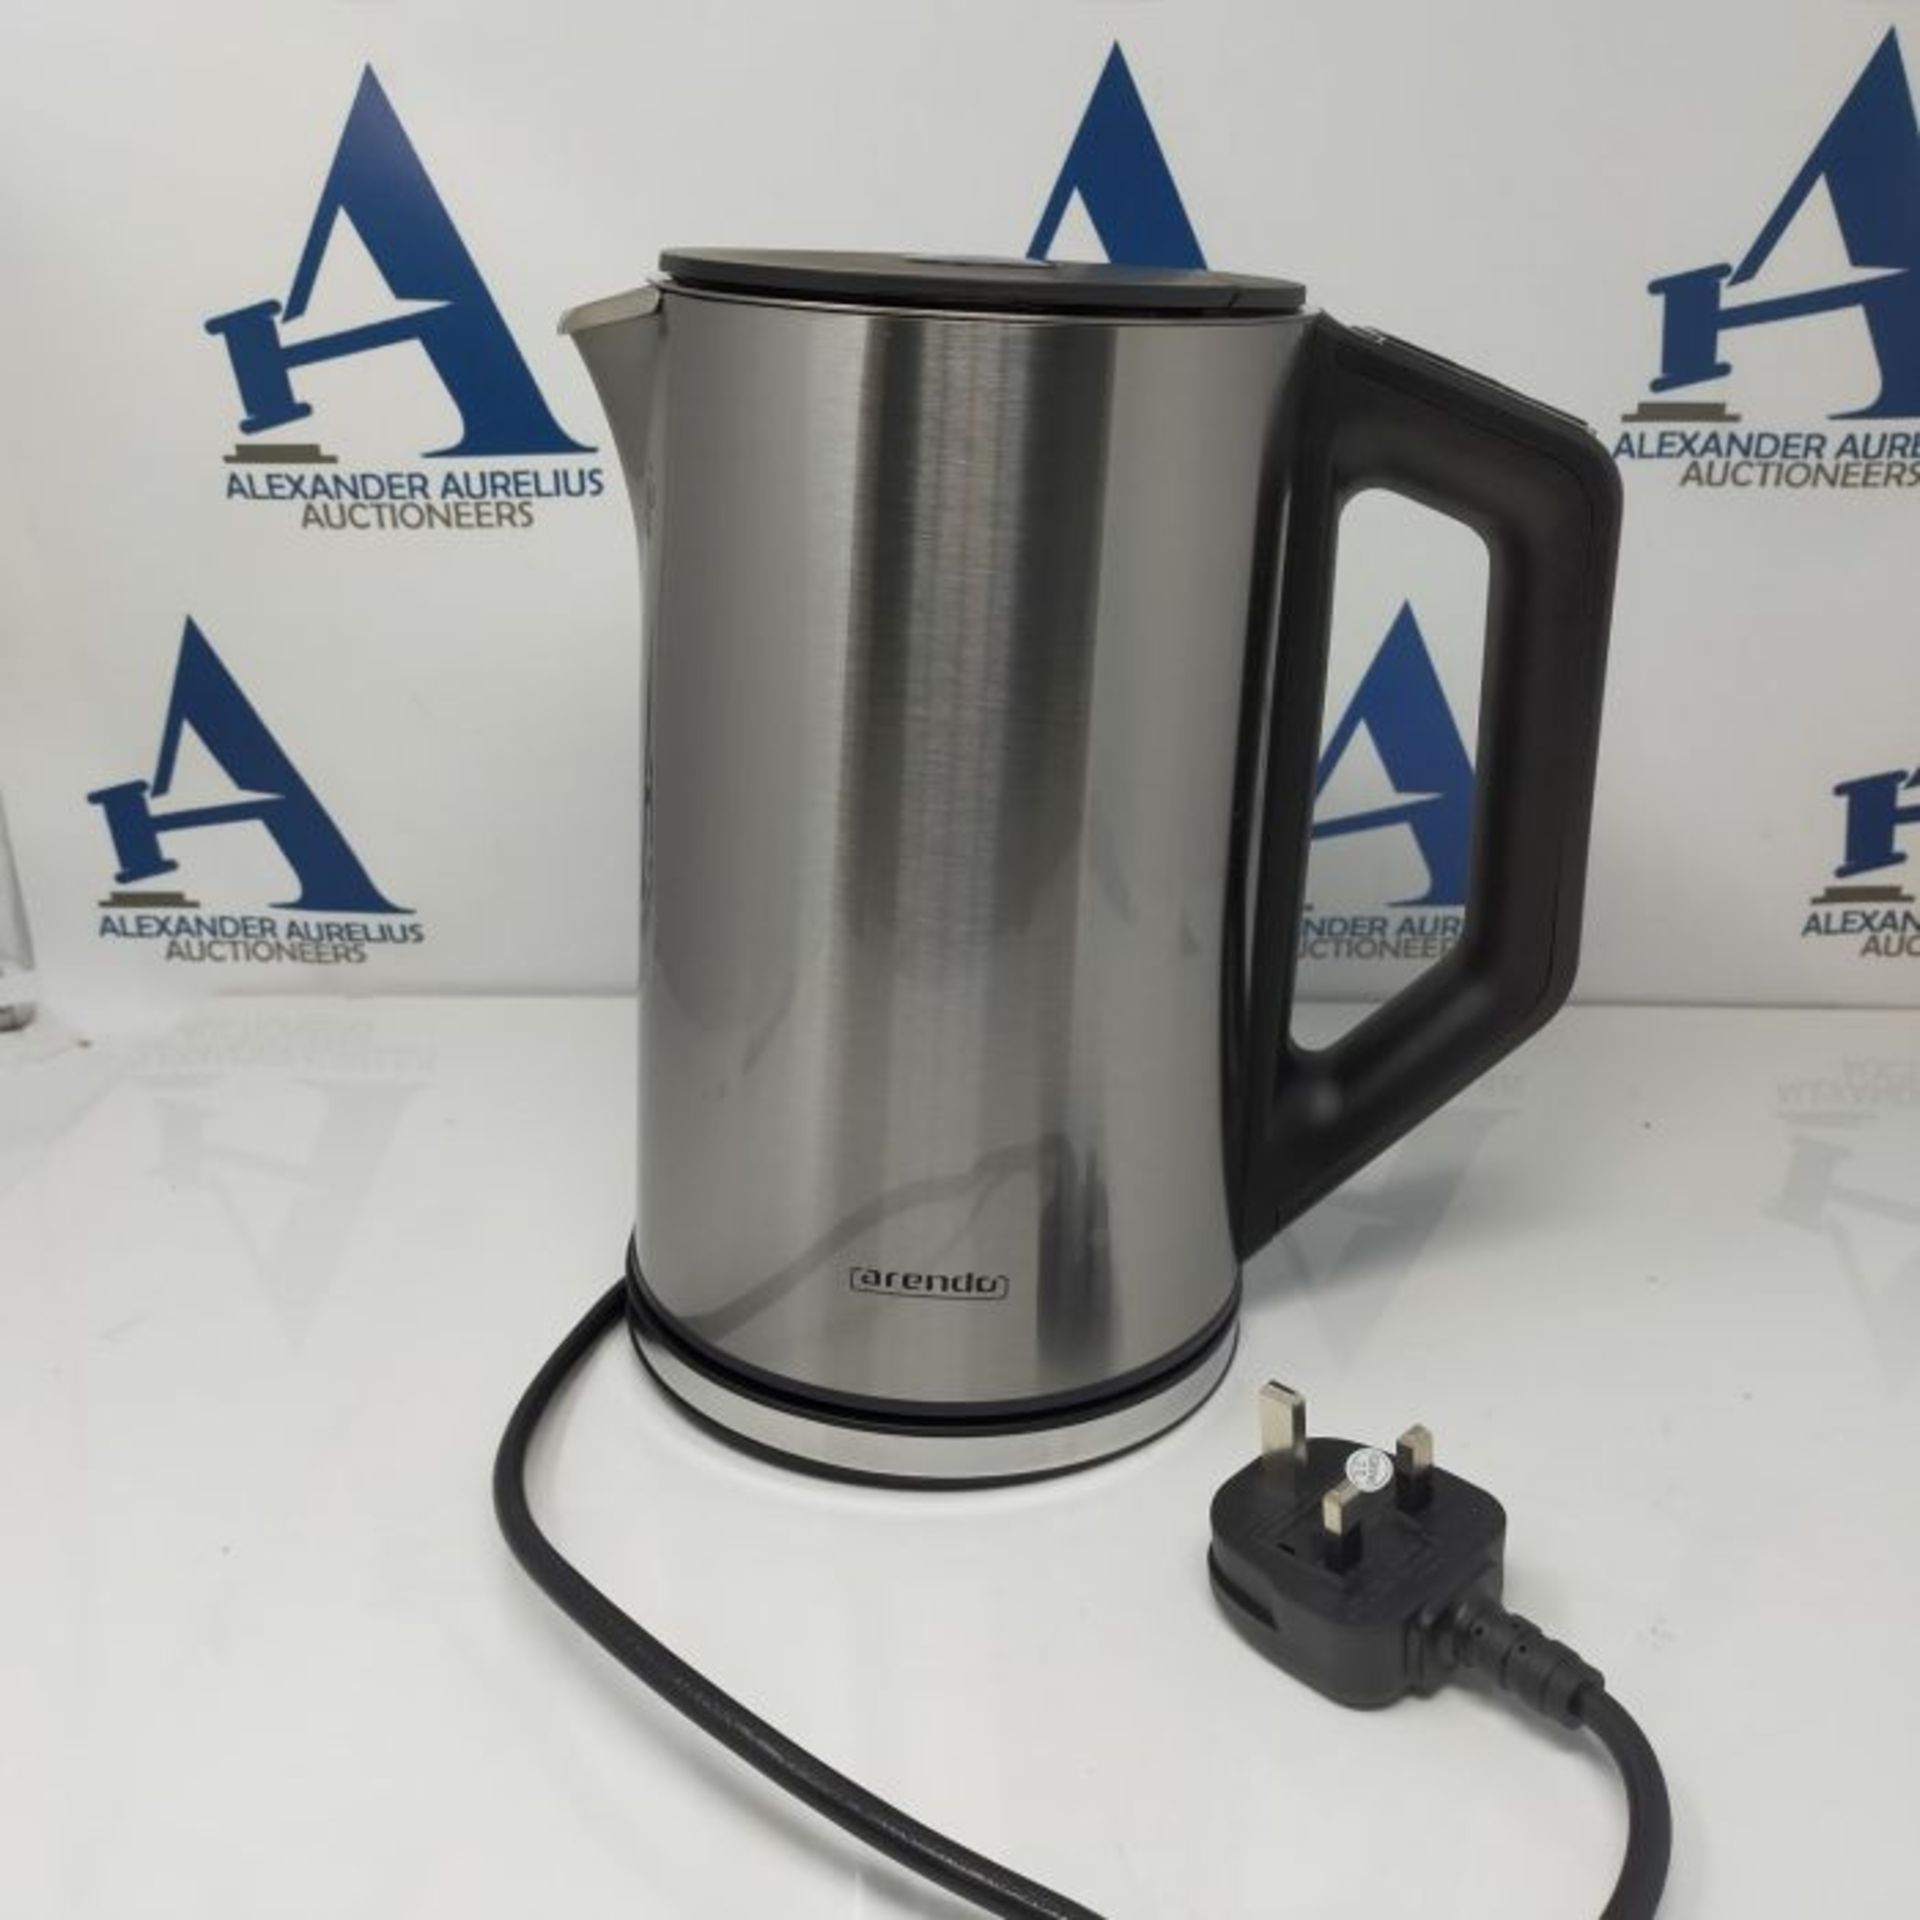 Arendo - Electric Kettle 1.5 L Cordless - Energy Saving due to Temperature Control fro - Image 3 of 3